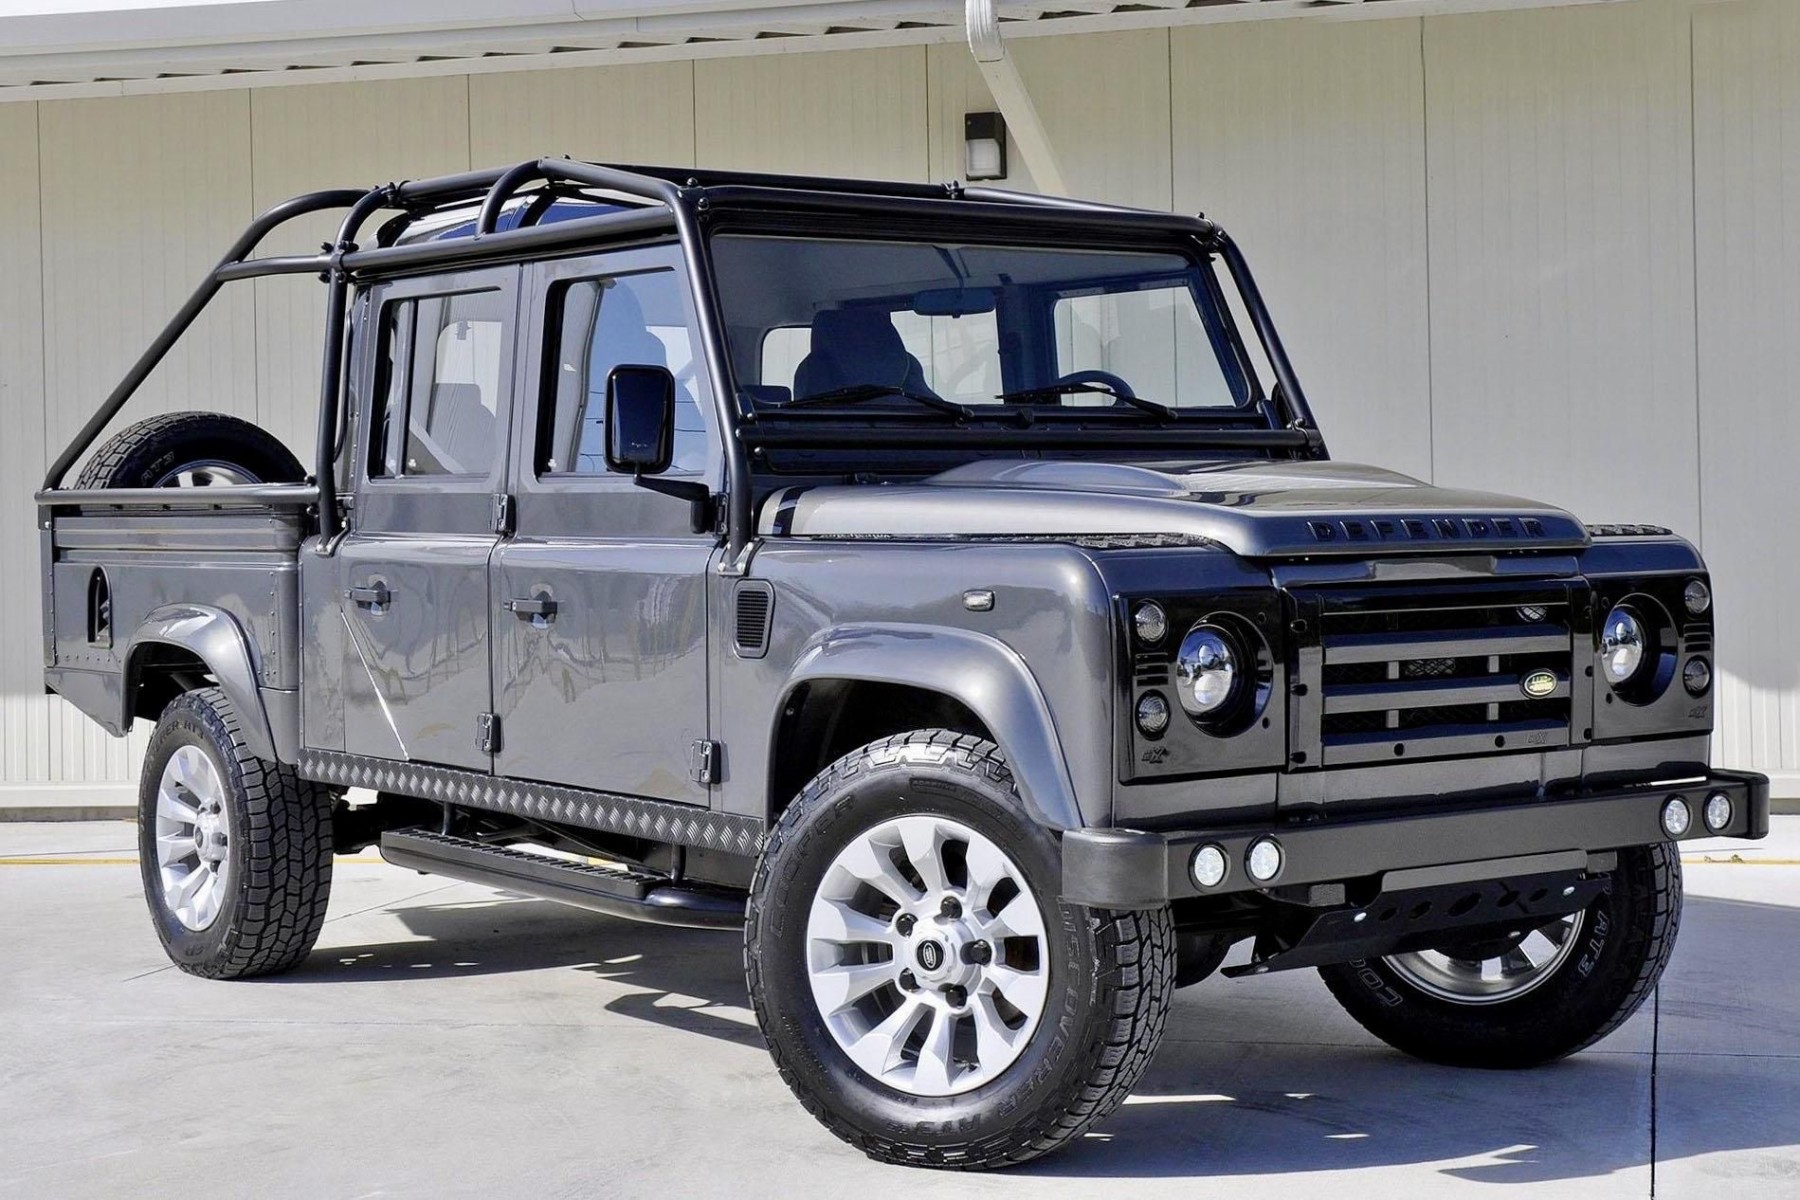 1994 Rover Defender 130 - The Big Picture